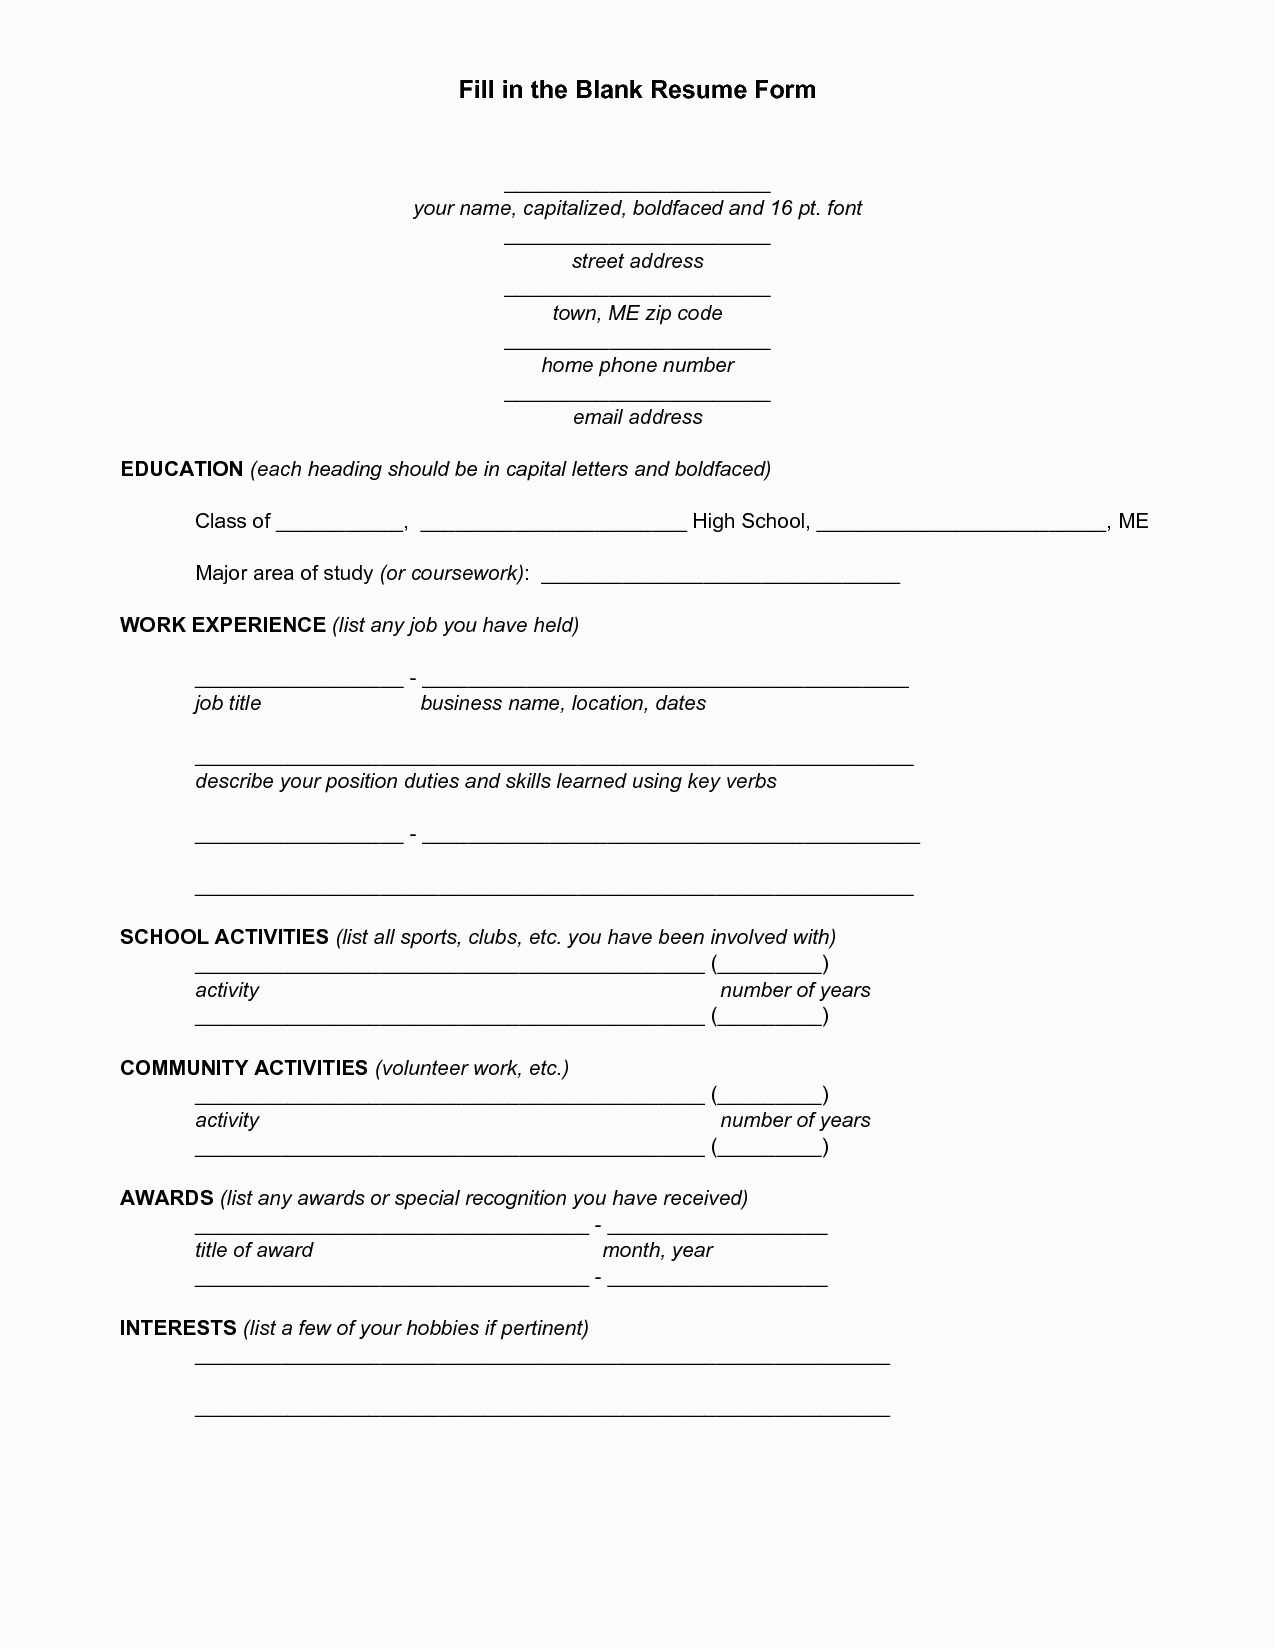 Blank Resume Template for High School Students Blank Resume Template for High School Students